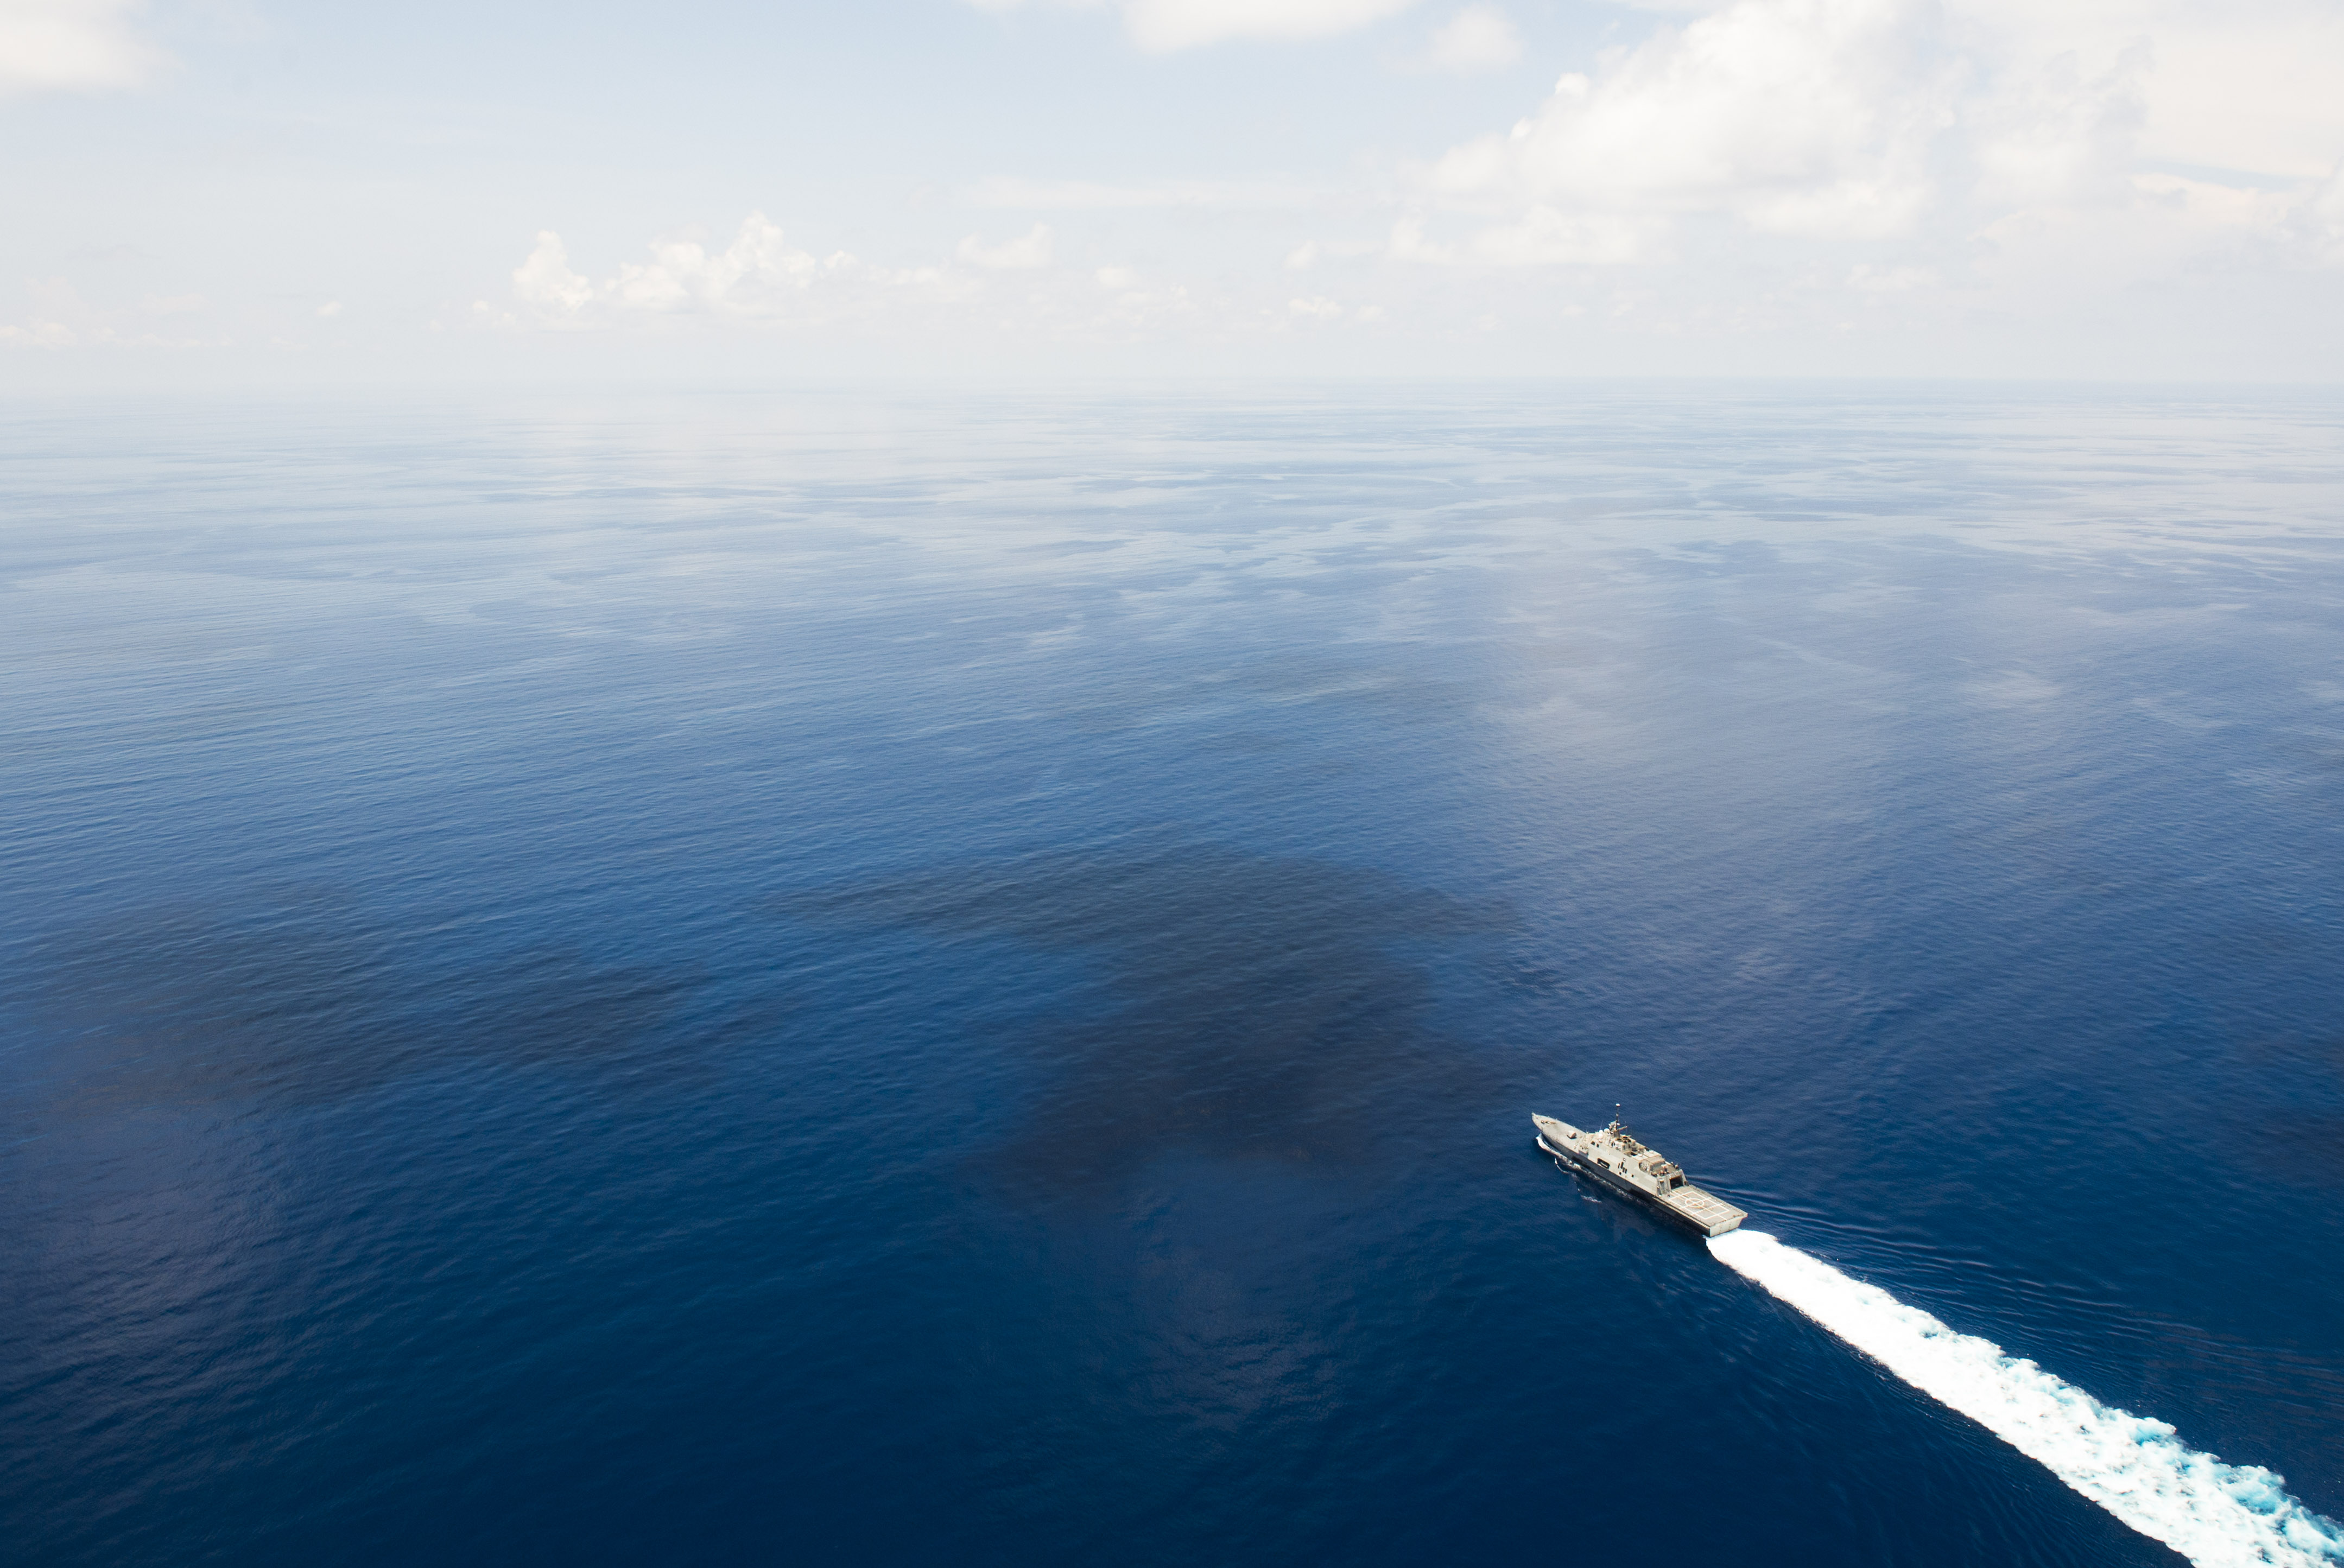 The littoral combat ship USS Fort Worth (LCS 3) sails near the Spratly Islands in the South China Sea last month. (Conor Minto / U.S. Navy)